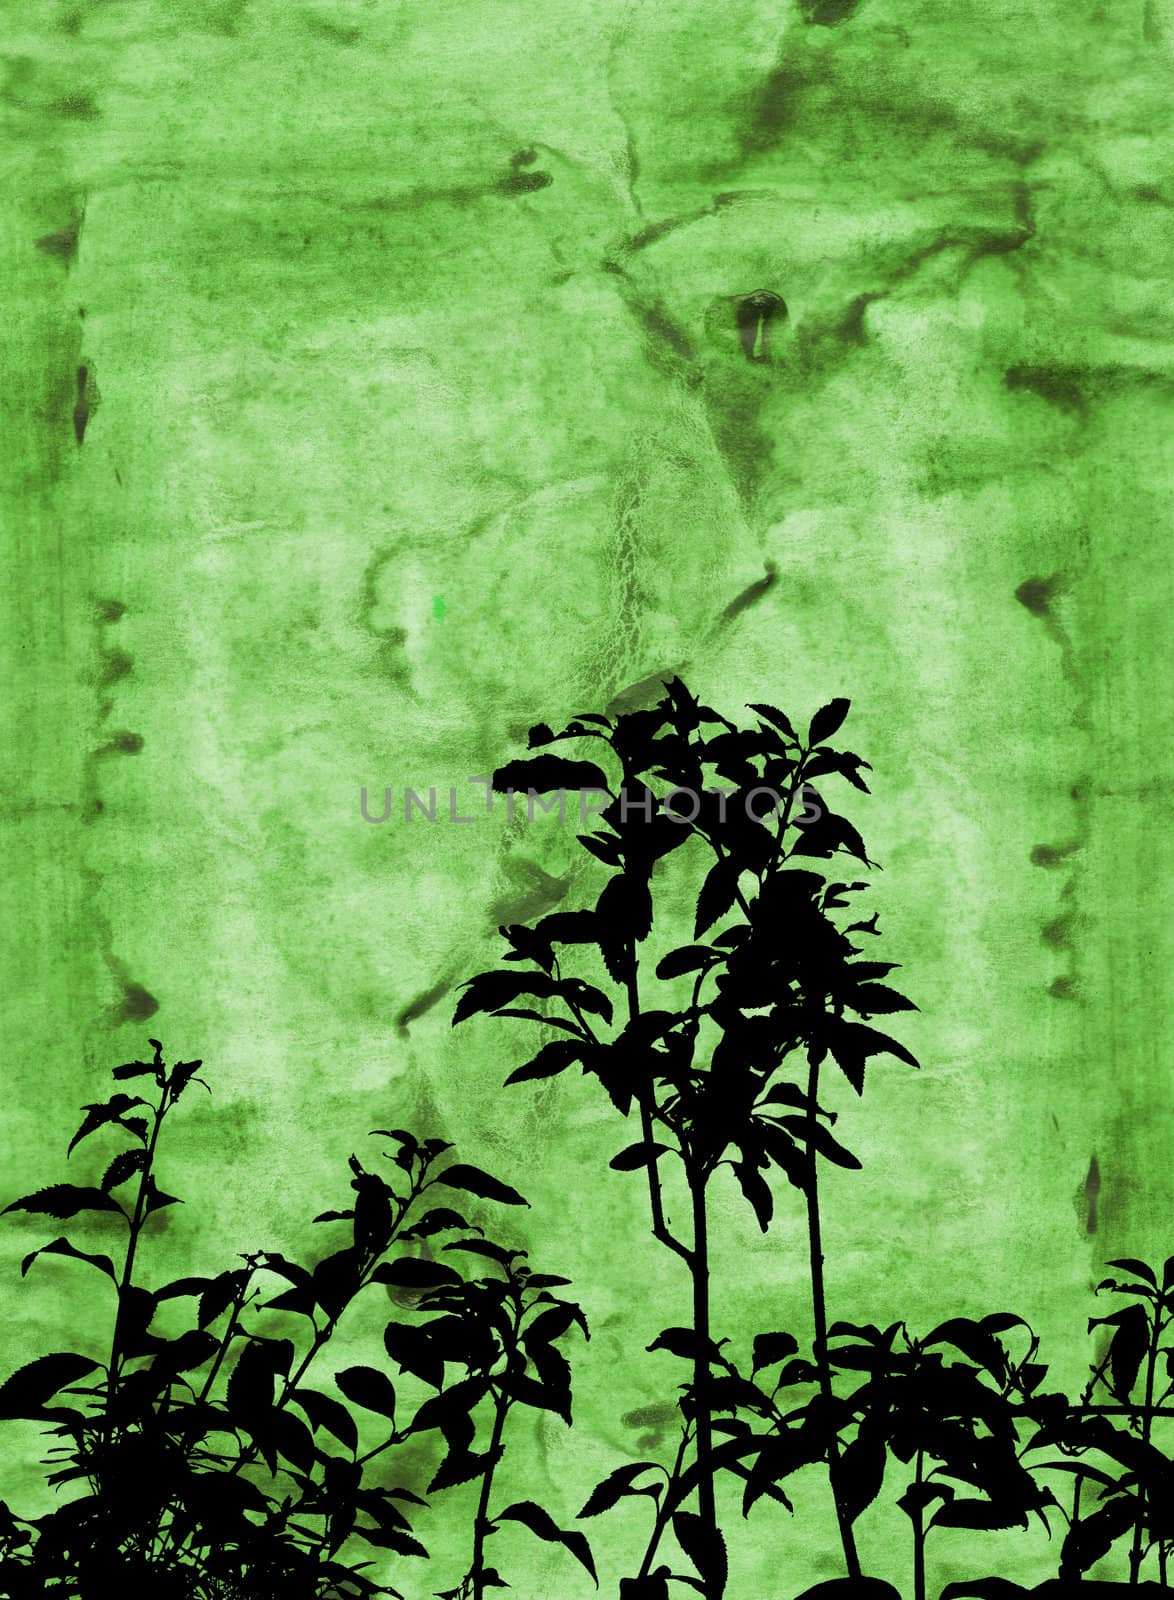 Silhouette of foliage on grunge background